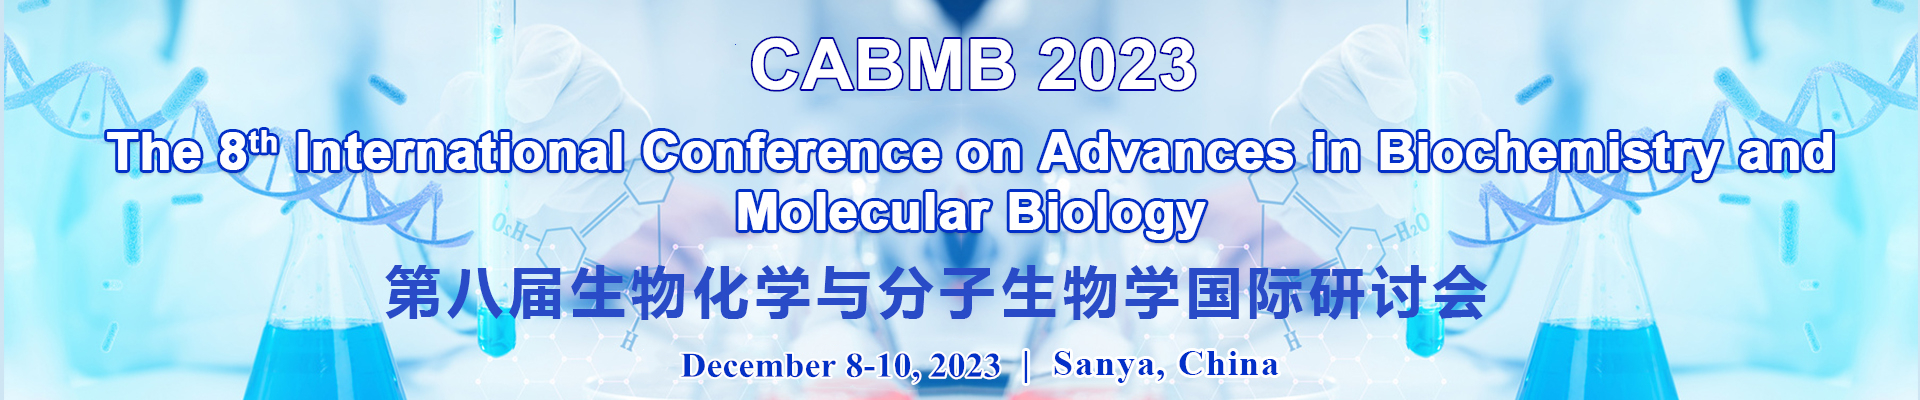 The 8th International Conference on Advances in Biochemistry and Molecular Biology (CABMB 2023)